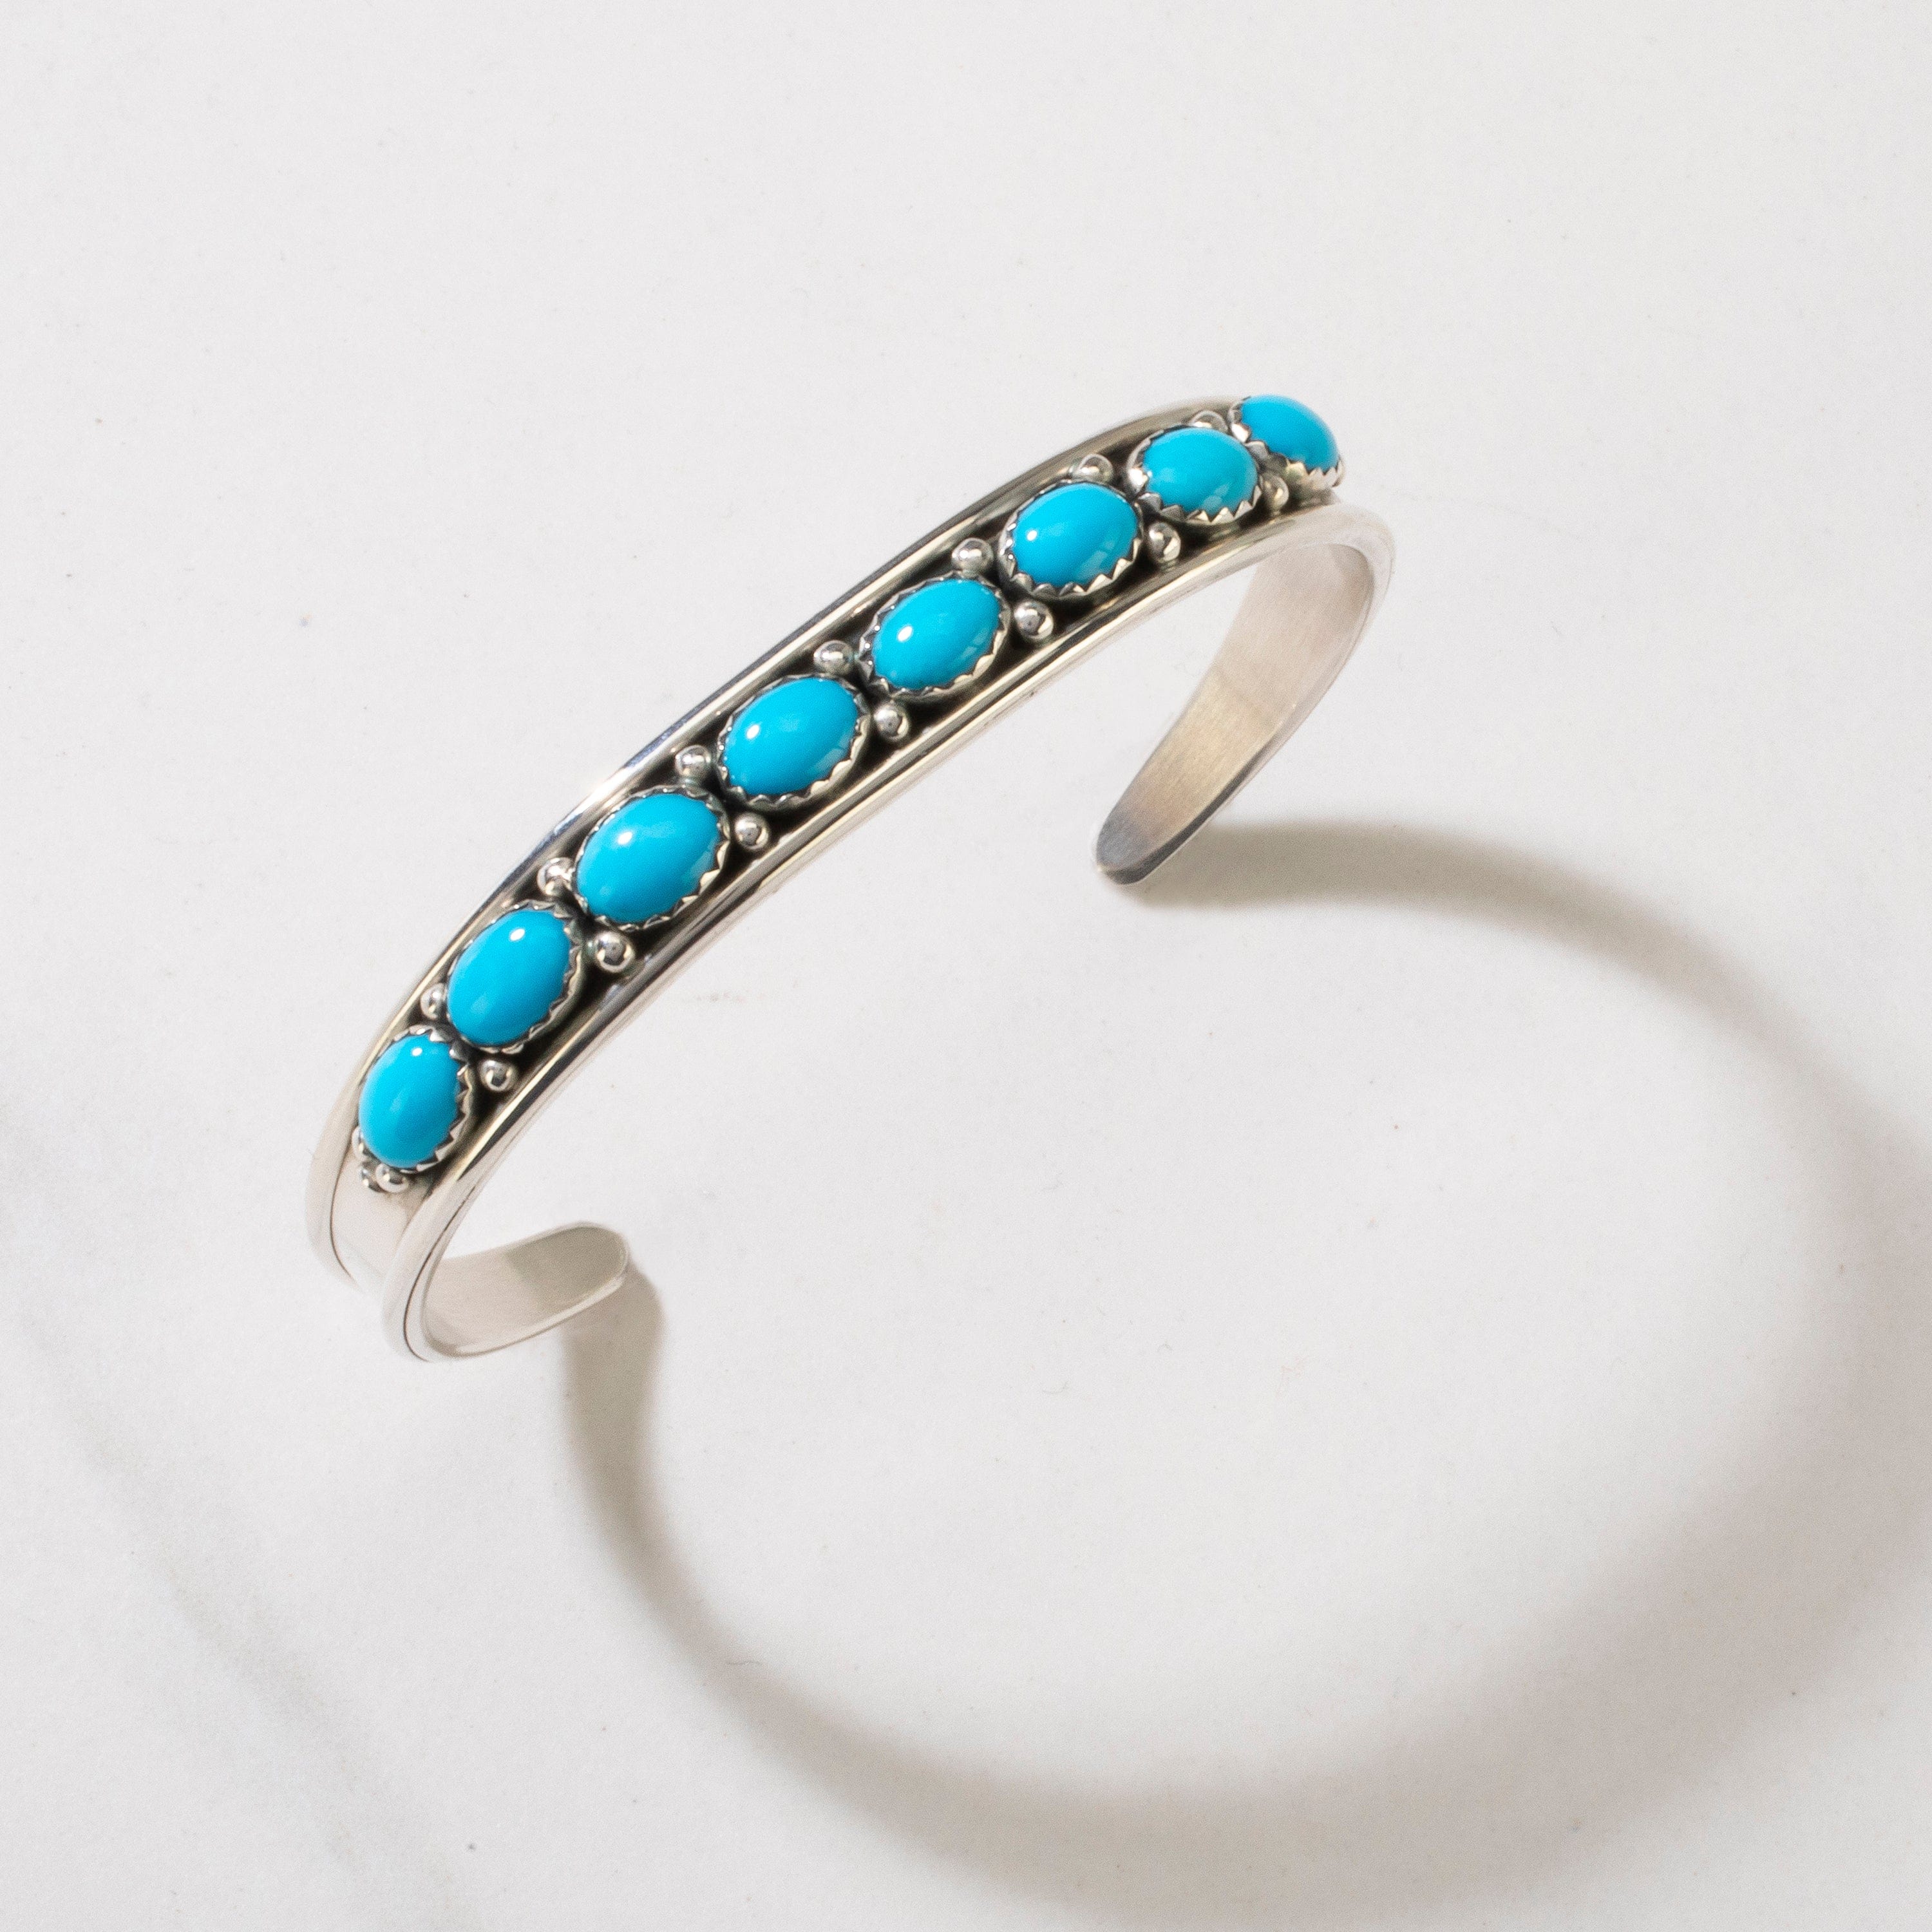 Kalifano Native American Jewelry Russell Sam Navajo Sleeping Beauty Turquoise USA Native American Made 925 Sterling Silver Cuff NAB800.013